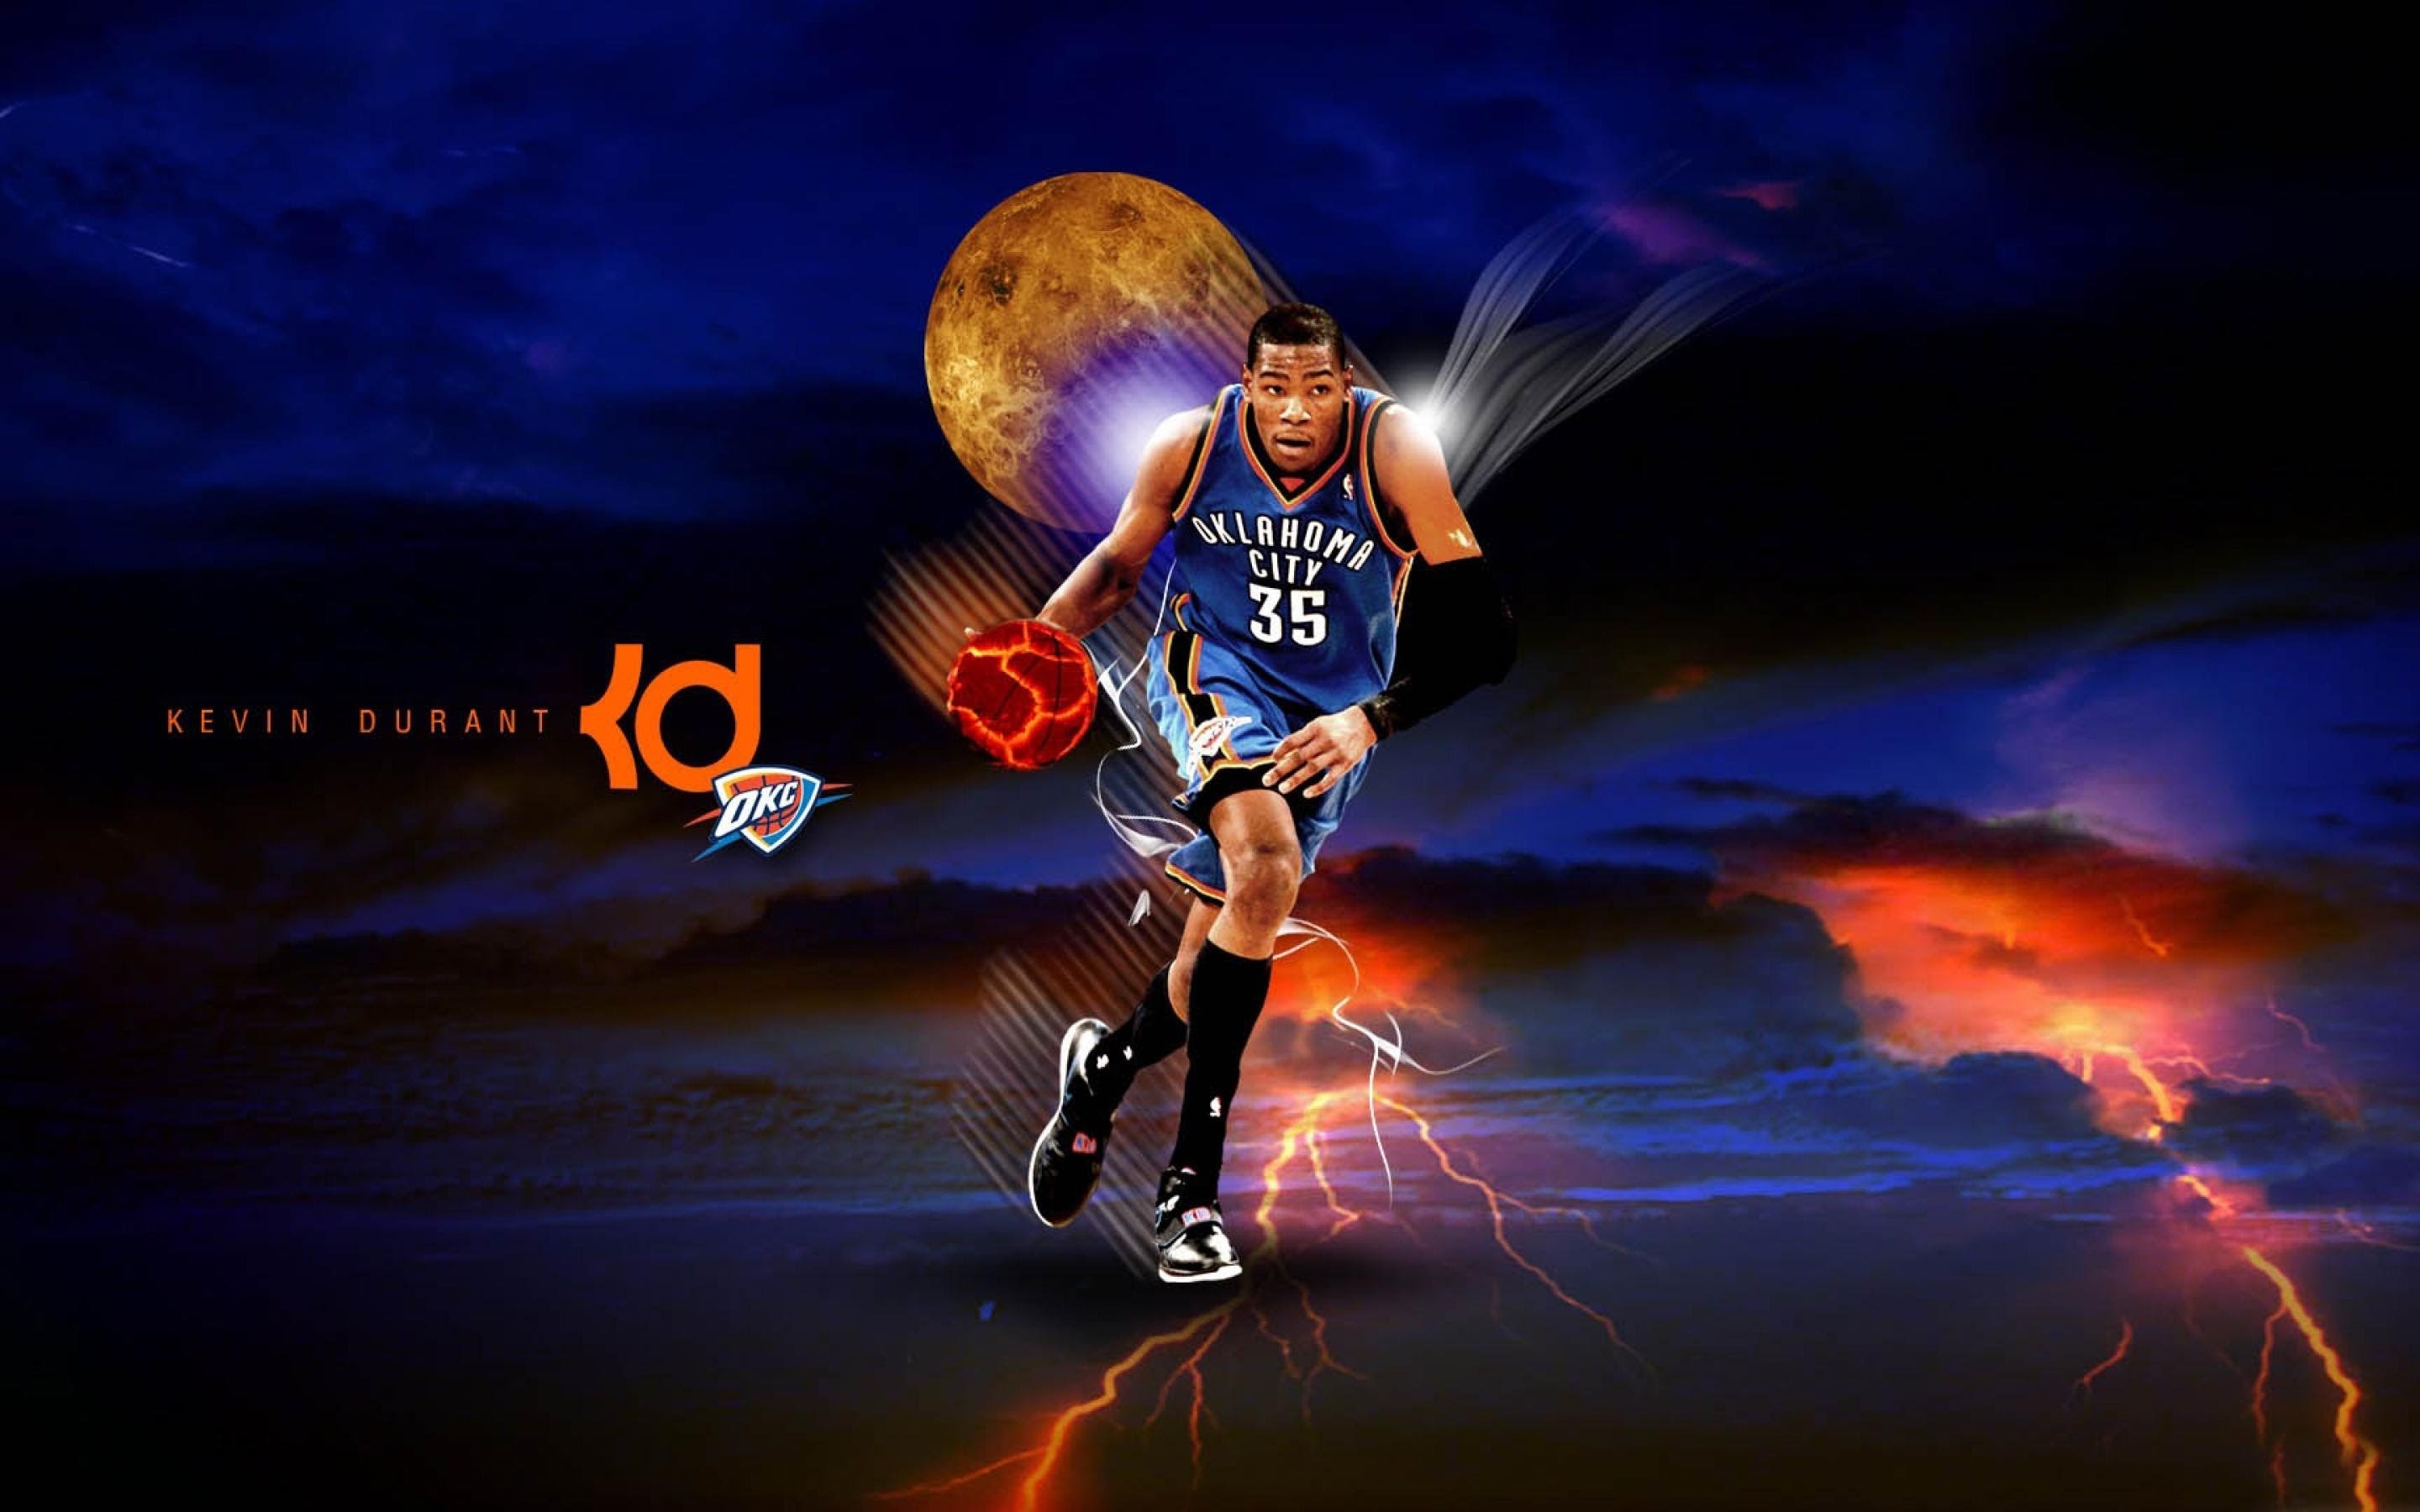 2880x1800 Kevin Durant Dunk Wallpapers 2015 - Wallpaper Cave